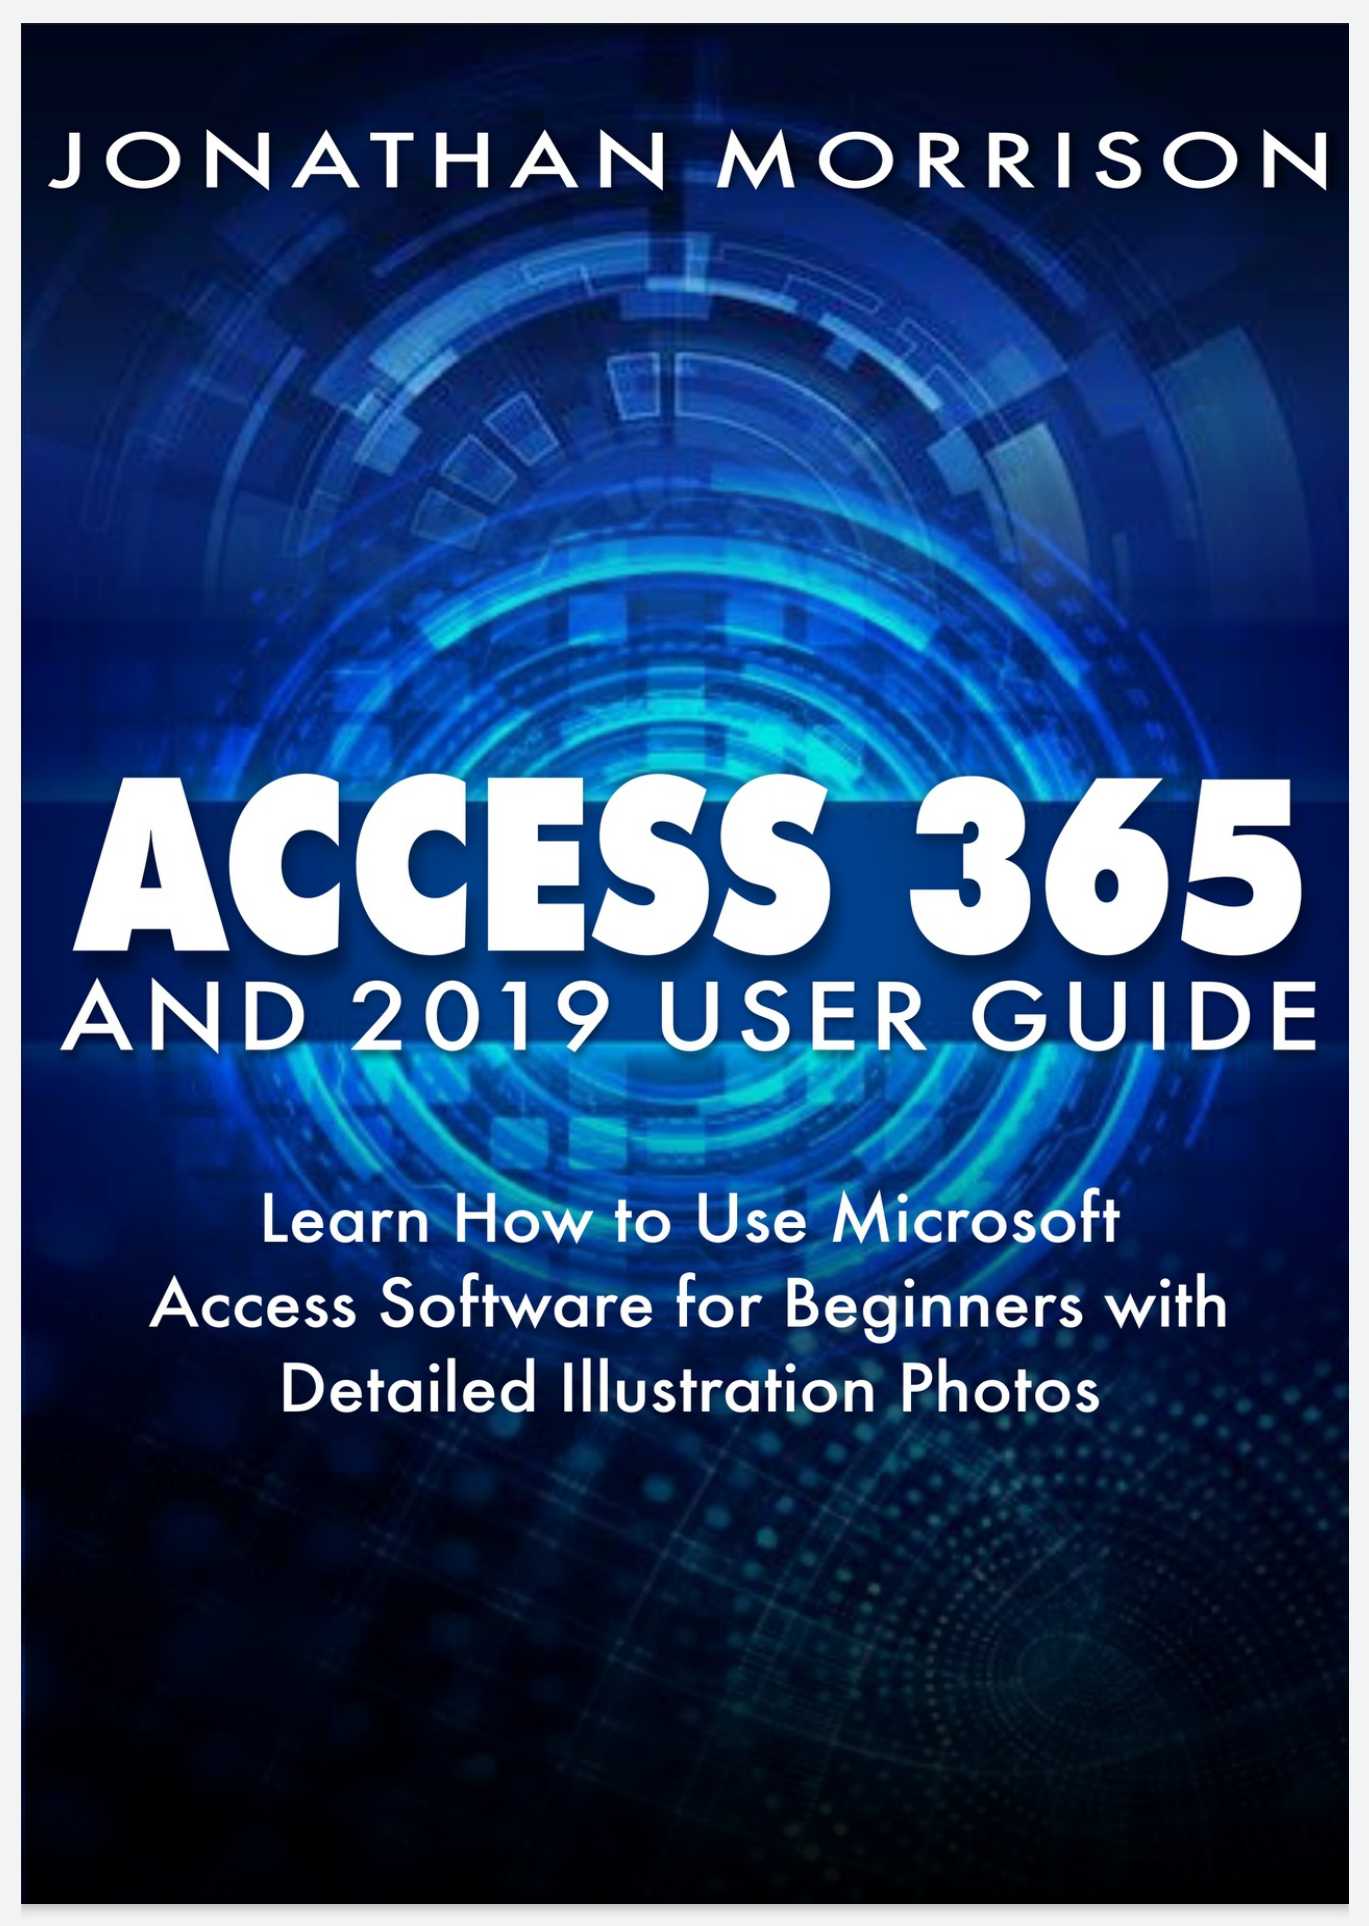 Access 365 And 2019 User Guide: Learn How to Use Microsoft Access Software for Beginners with Detailed Illustration Photos